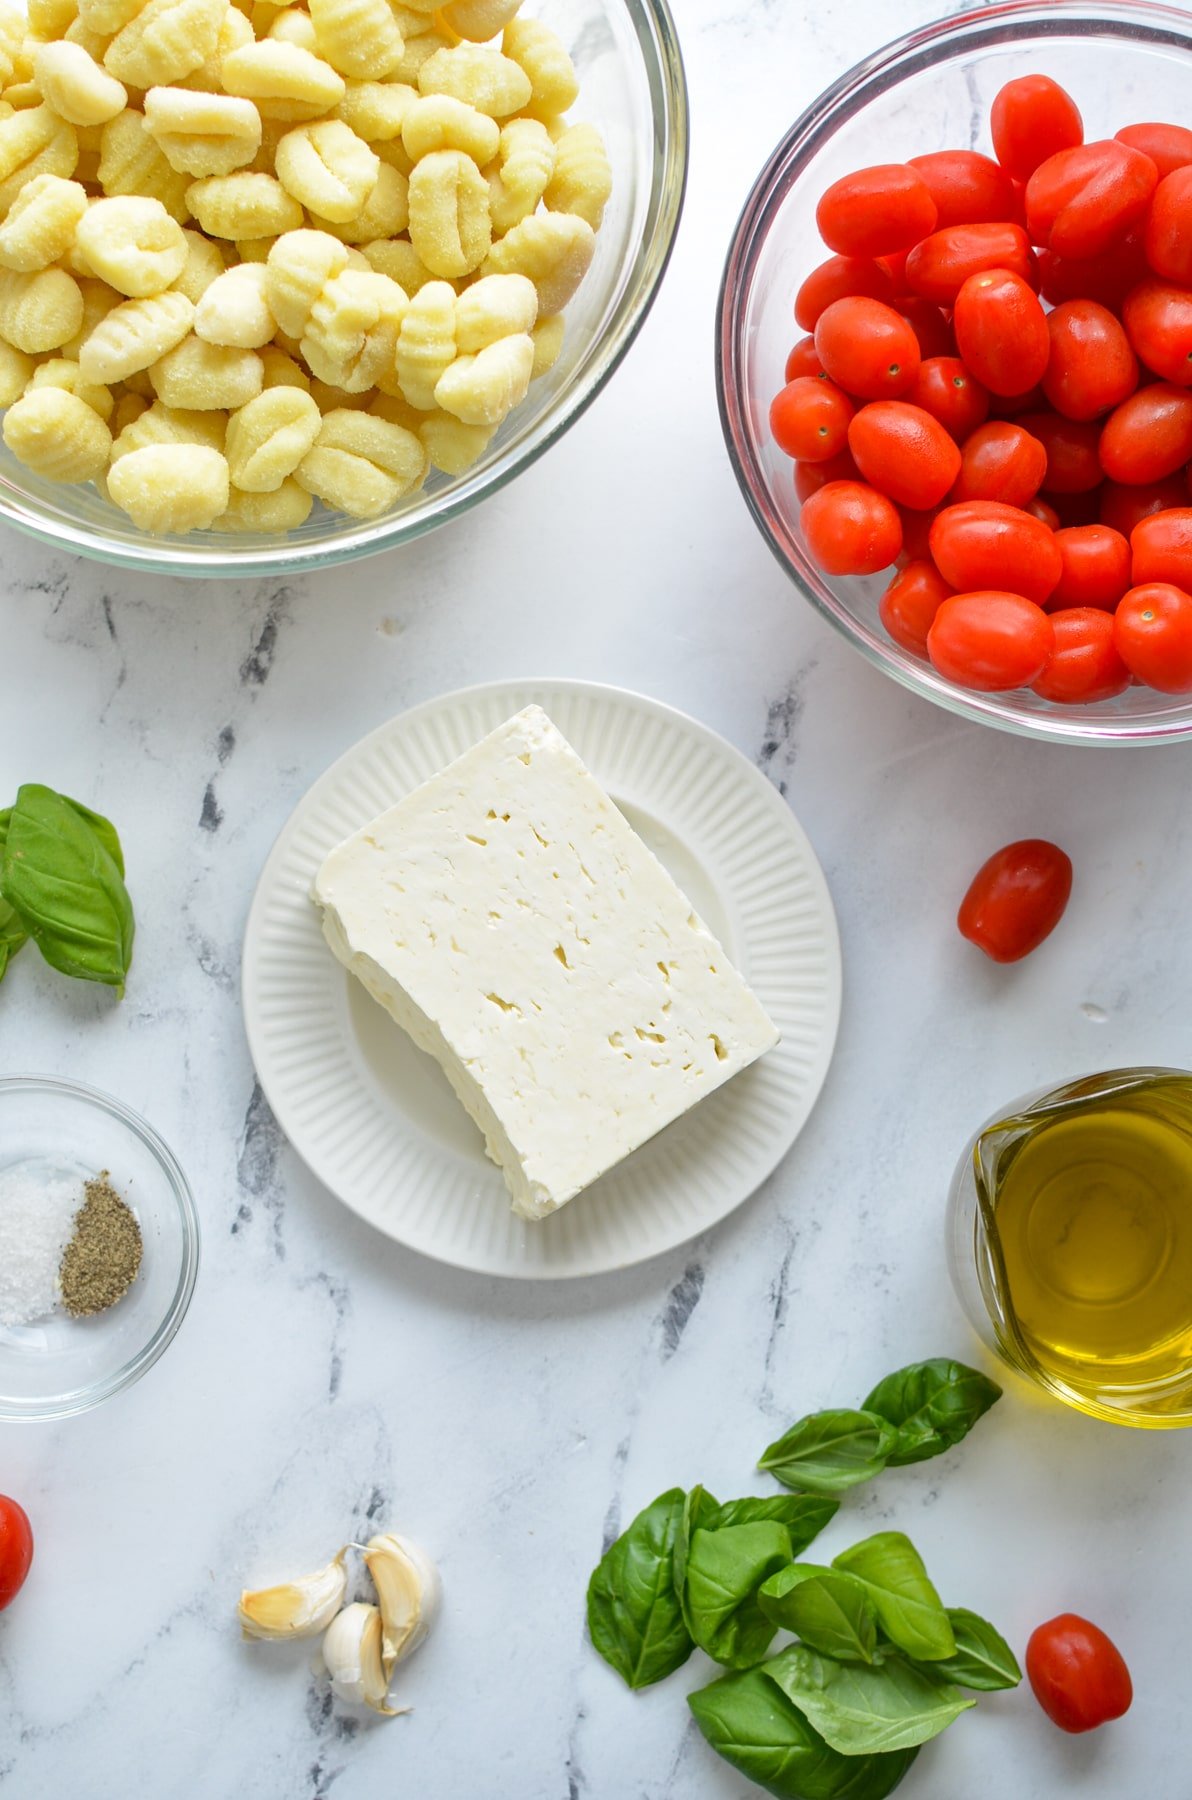 The ingredients needed to make baked feta gnocchi: feta, gnocchi, cherry tomatoes, garlic, olive oil, basil, and salt and pepper.